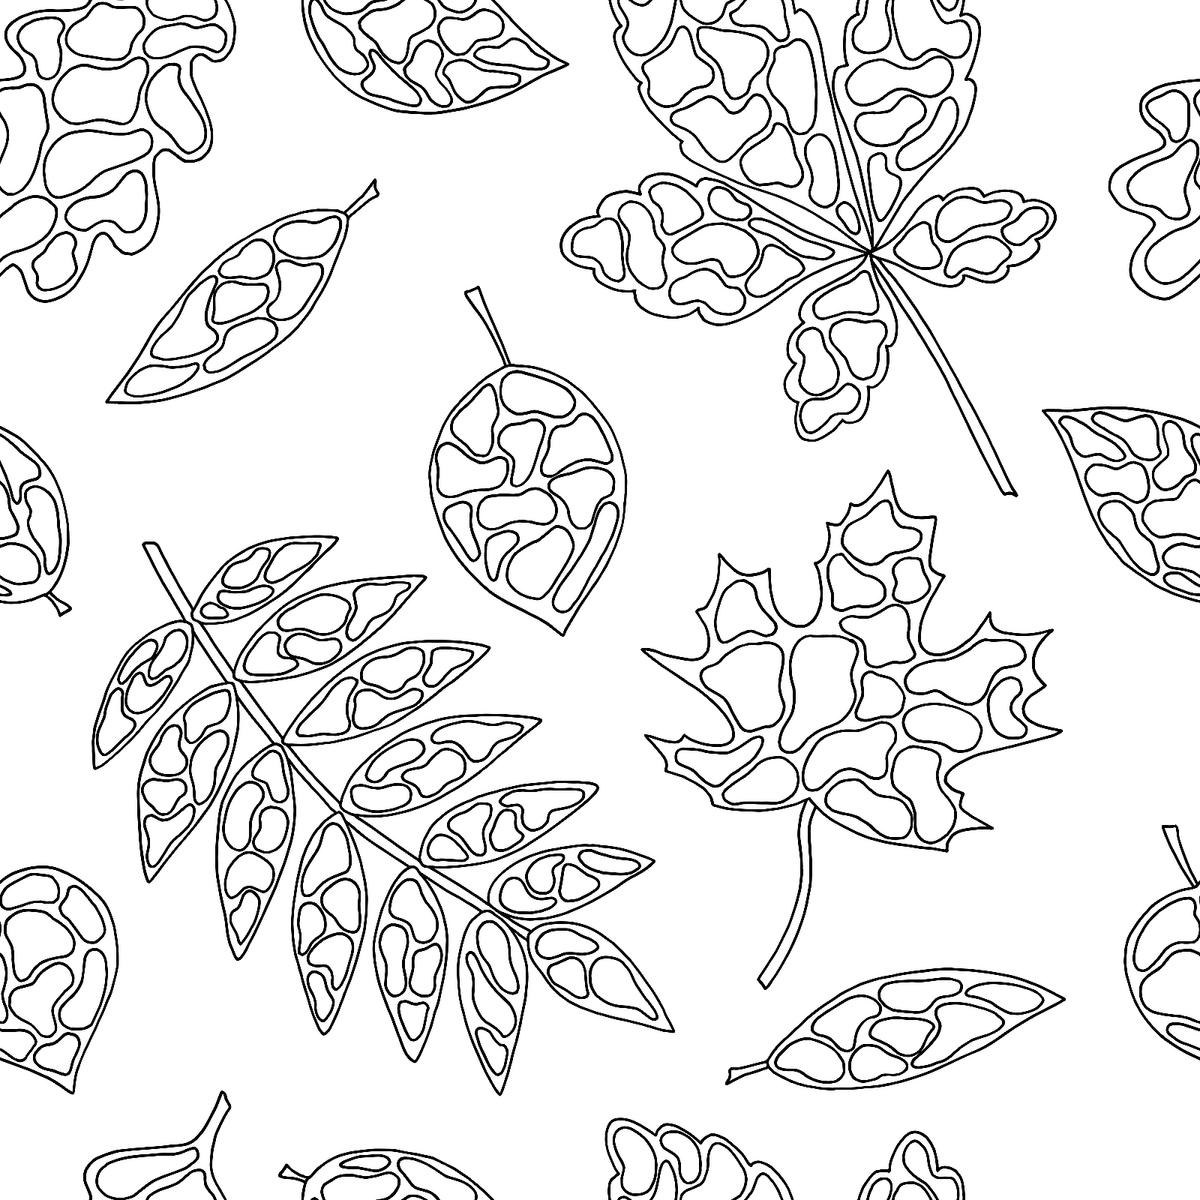 Autumn Season Coloring Pages - Coloring Home